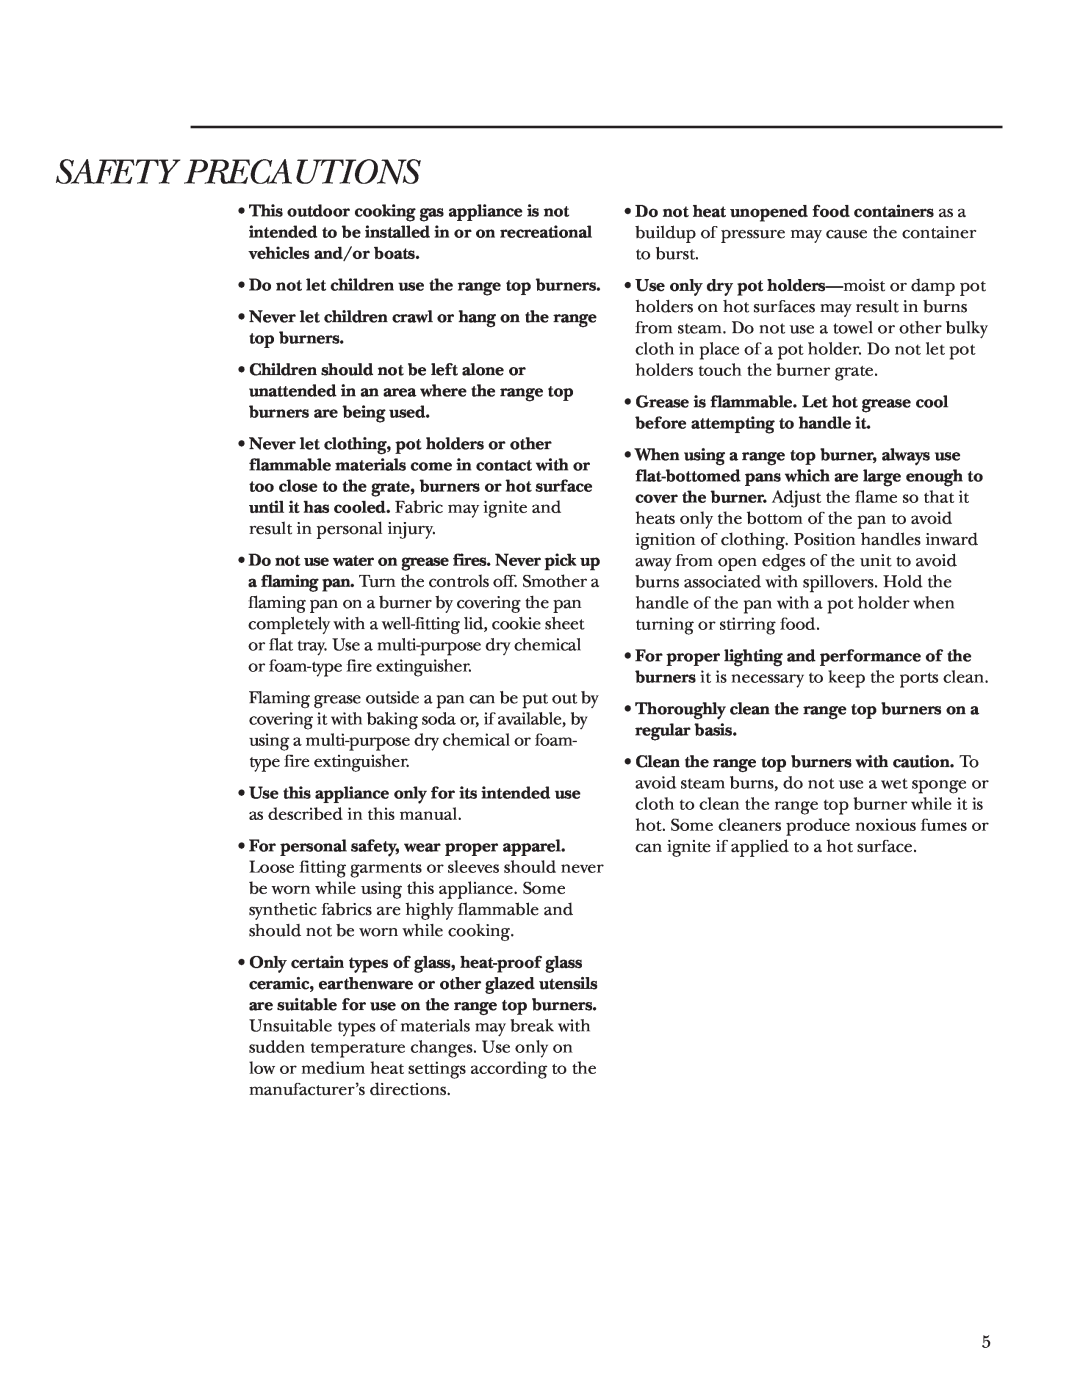 GE Monogram ZX2YSS owner manual Safety Precautions, Do not let children use the range top burners 